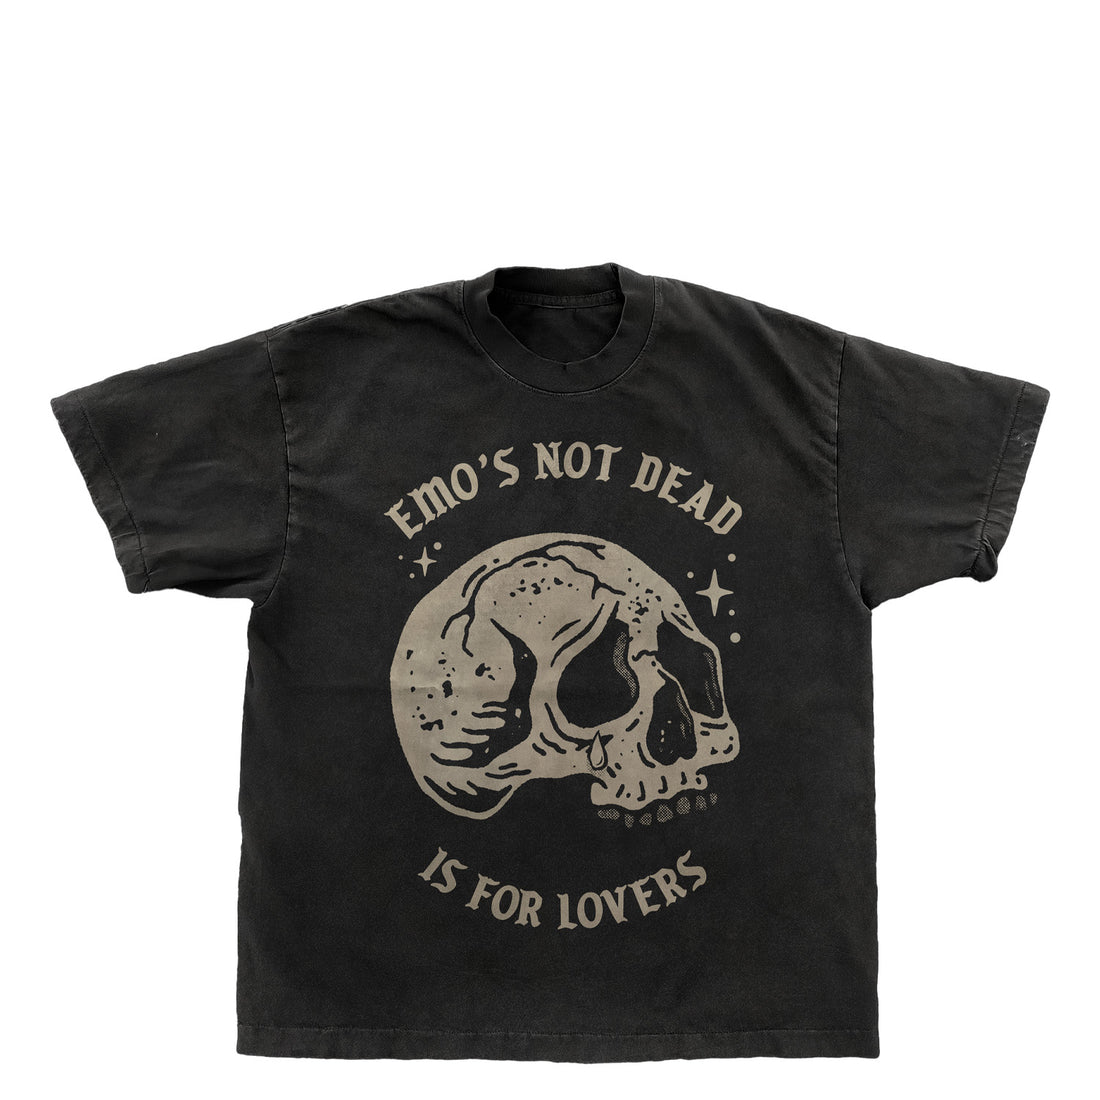 Is For Lovers Tee 